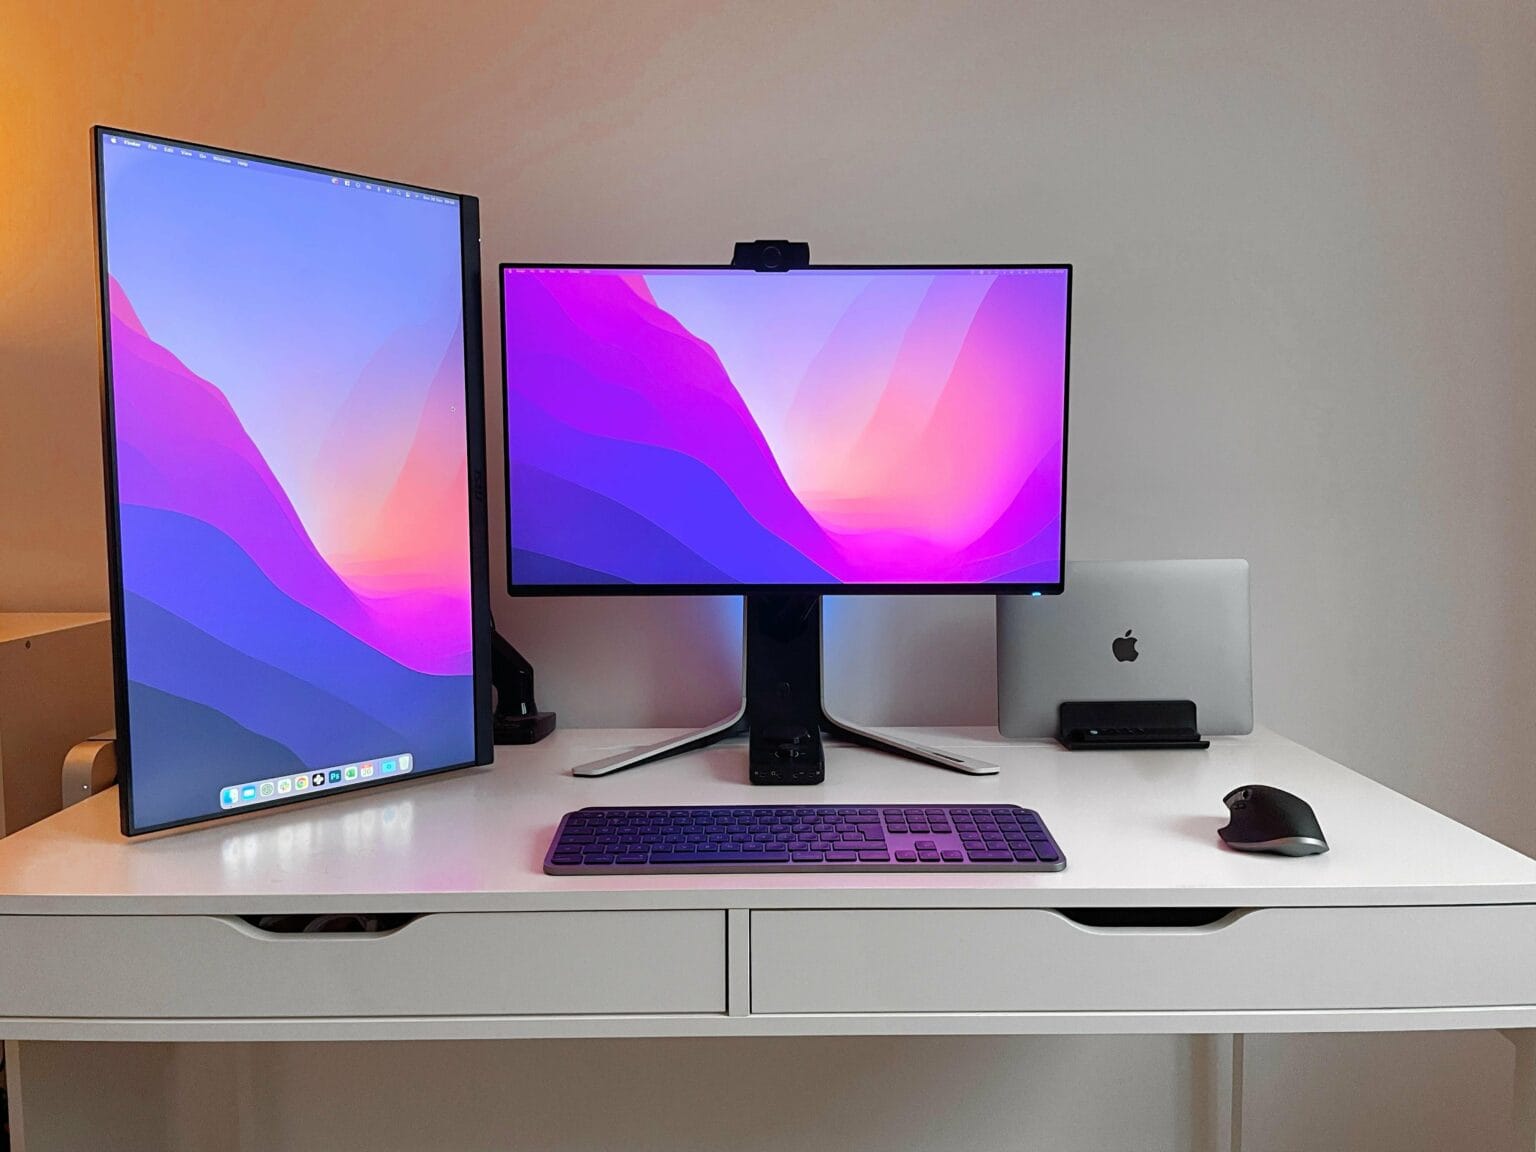 Dual M1 Mac and PS5 gaming rig boasts blazing-fast displays [Setups]: When you've got that need for speed ...